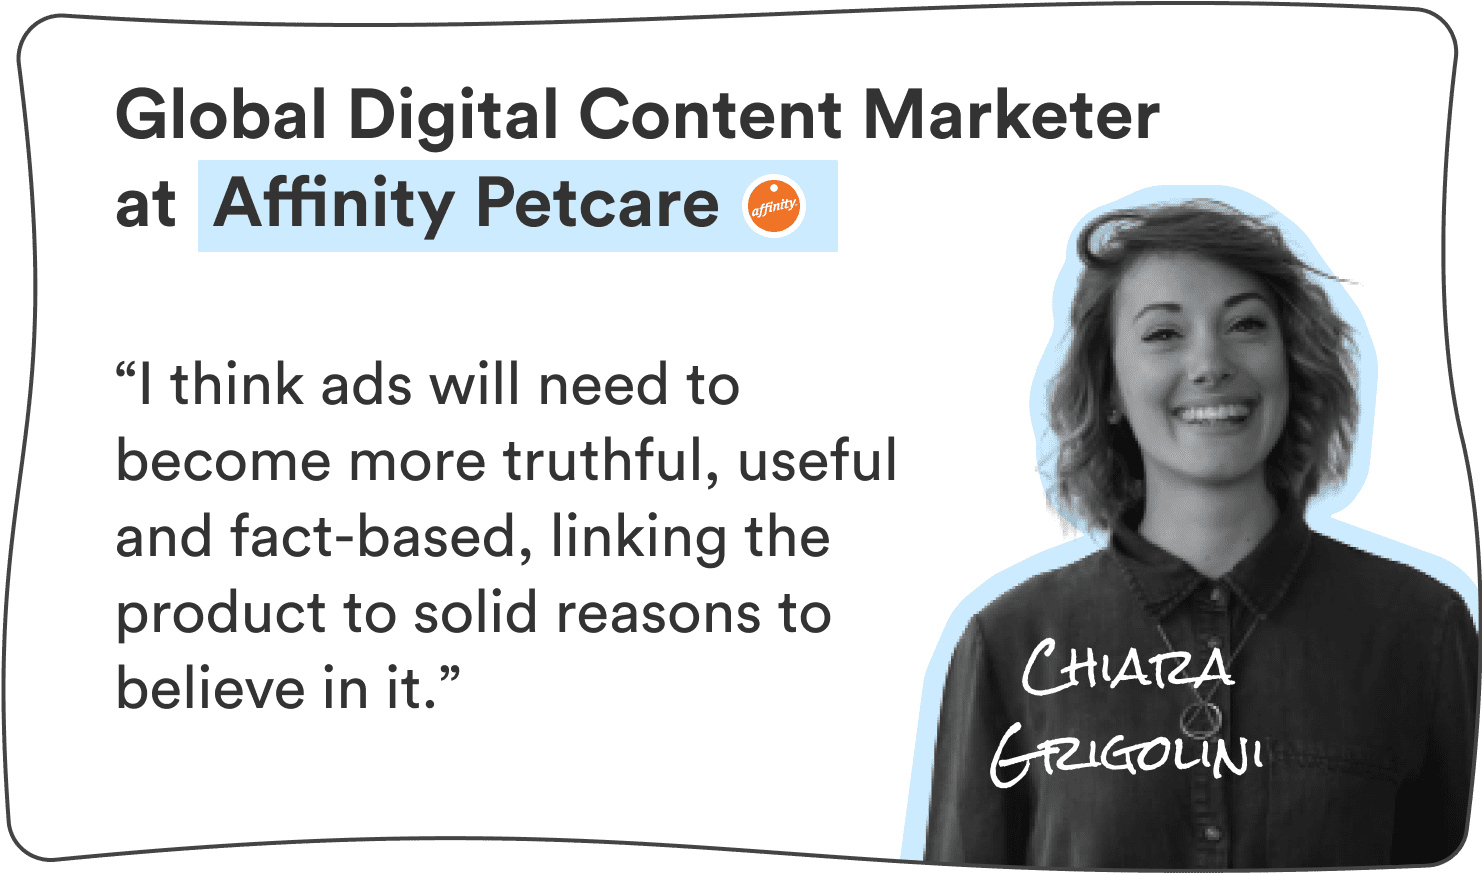 Chiara Grigolini, Global Digital Content Marketer at Affinity Petcare: “I think ads will need to become more truthful, useful and fact-based, linking the product to solid reasons to believe in it.”